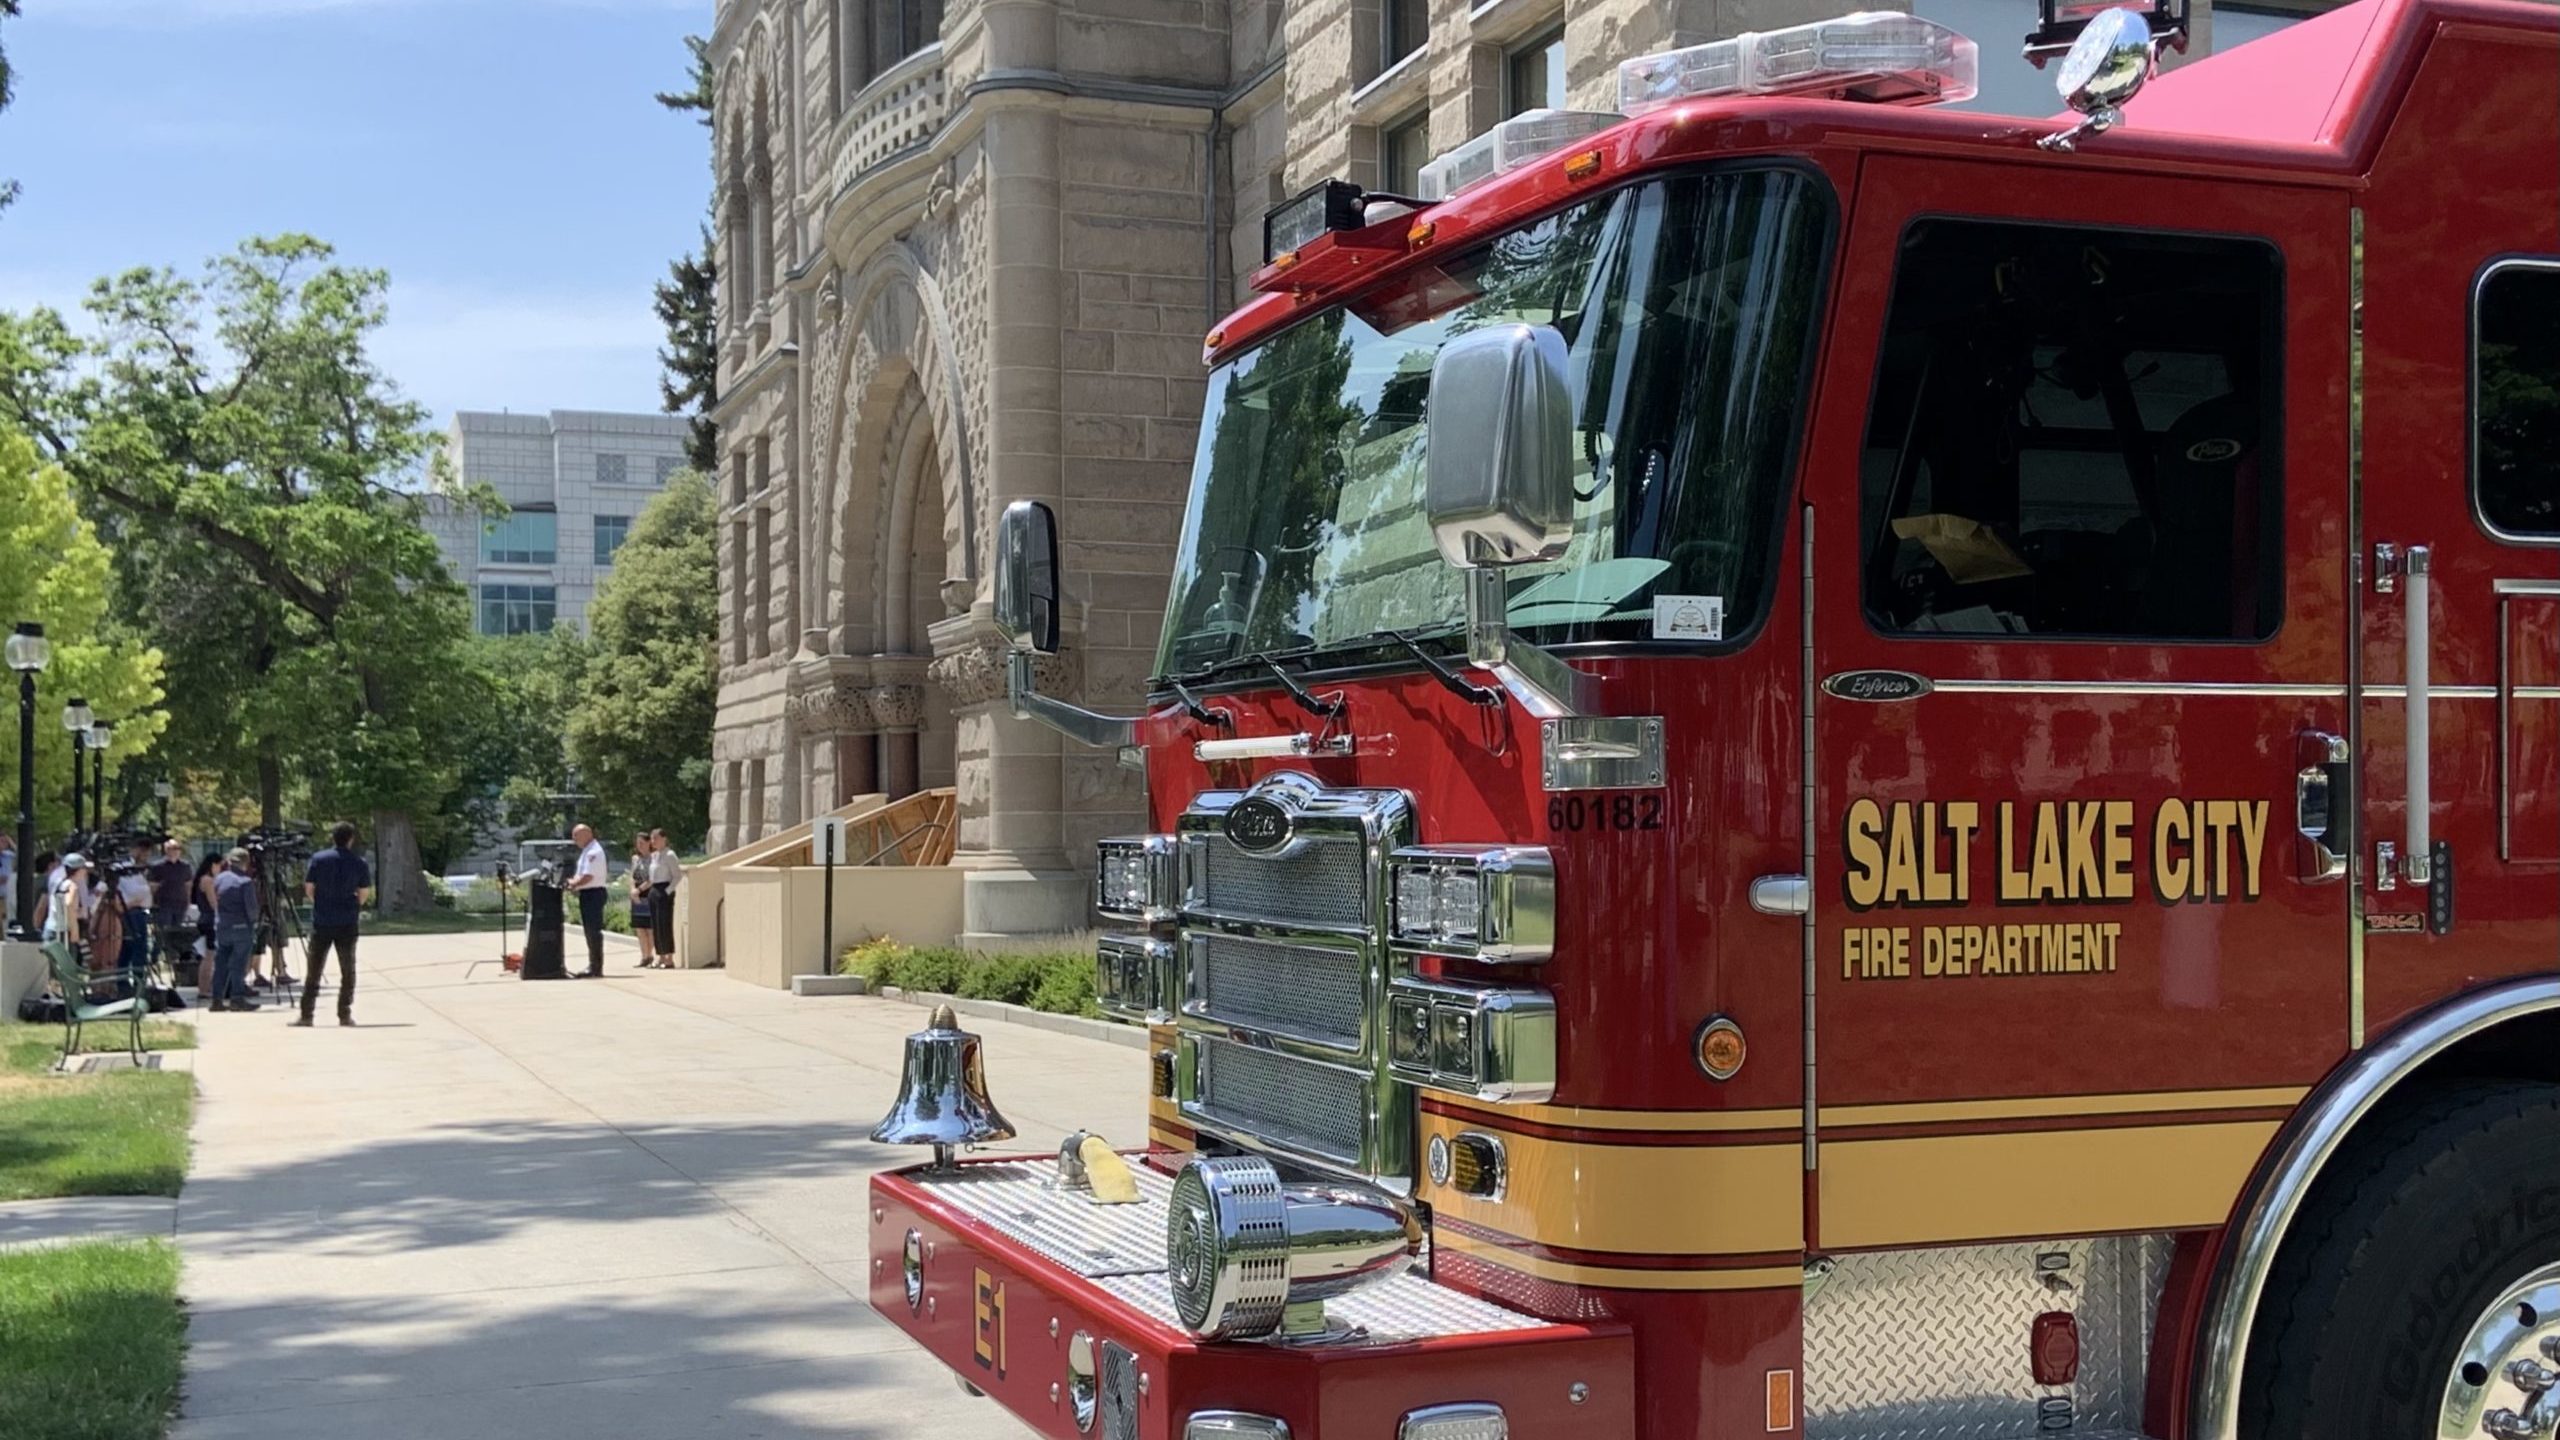 A Salt Lake City Fire Department engine parked next to the Salt Lake City and Council Building. Pho...